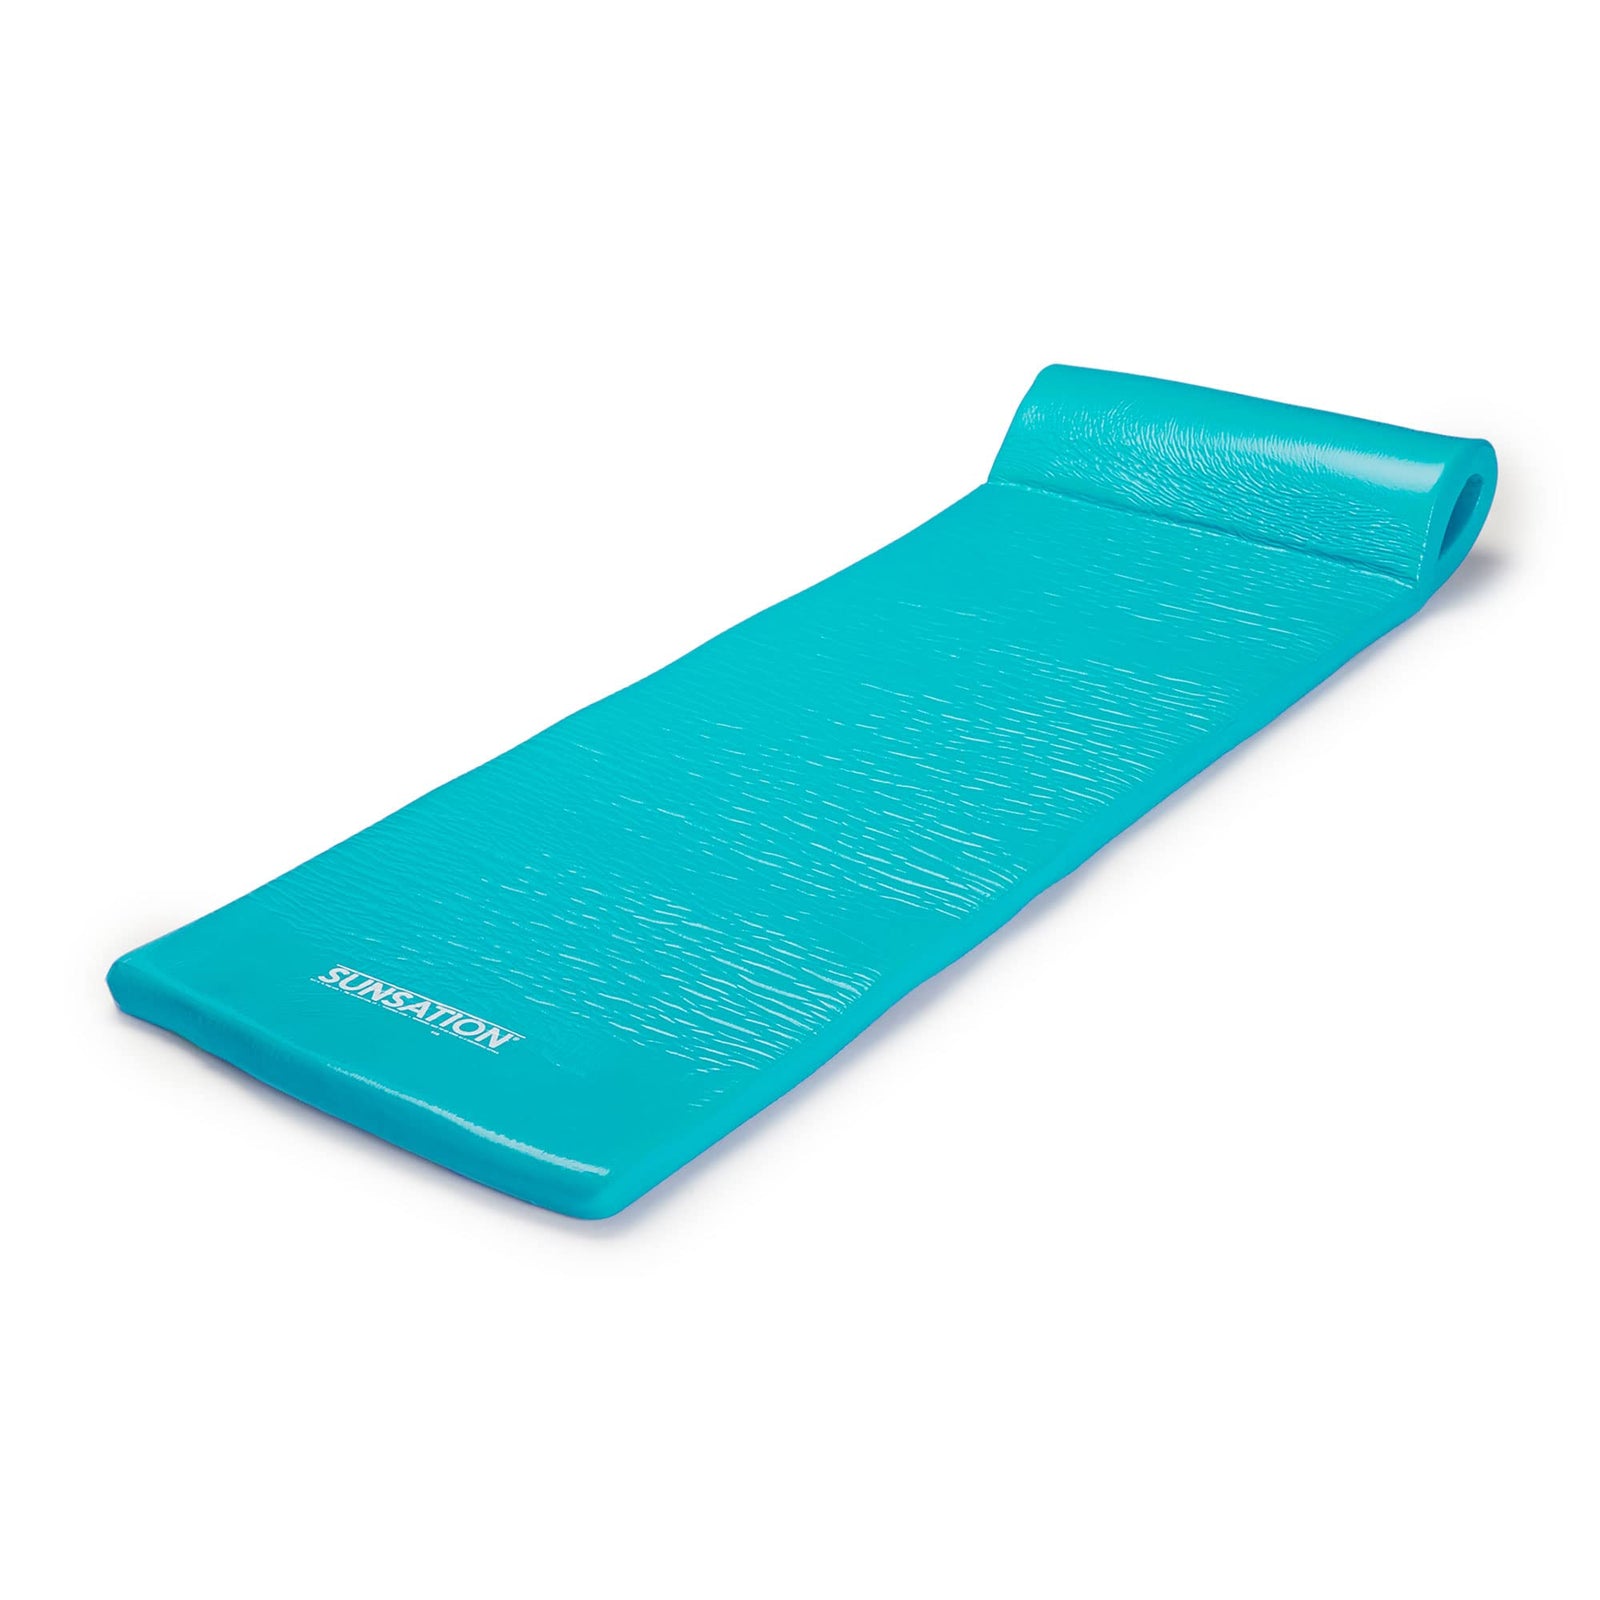 Texas Recreation Sunsation 1.75" Thick Swimming Pool Foam Pool Floating Mattress, Teal